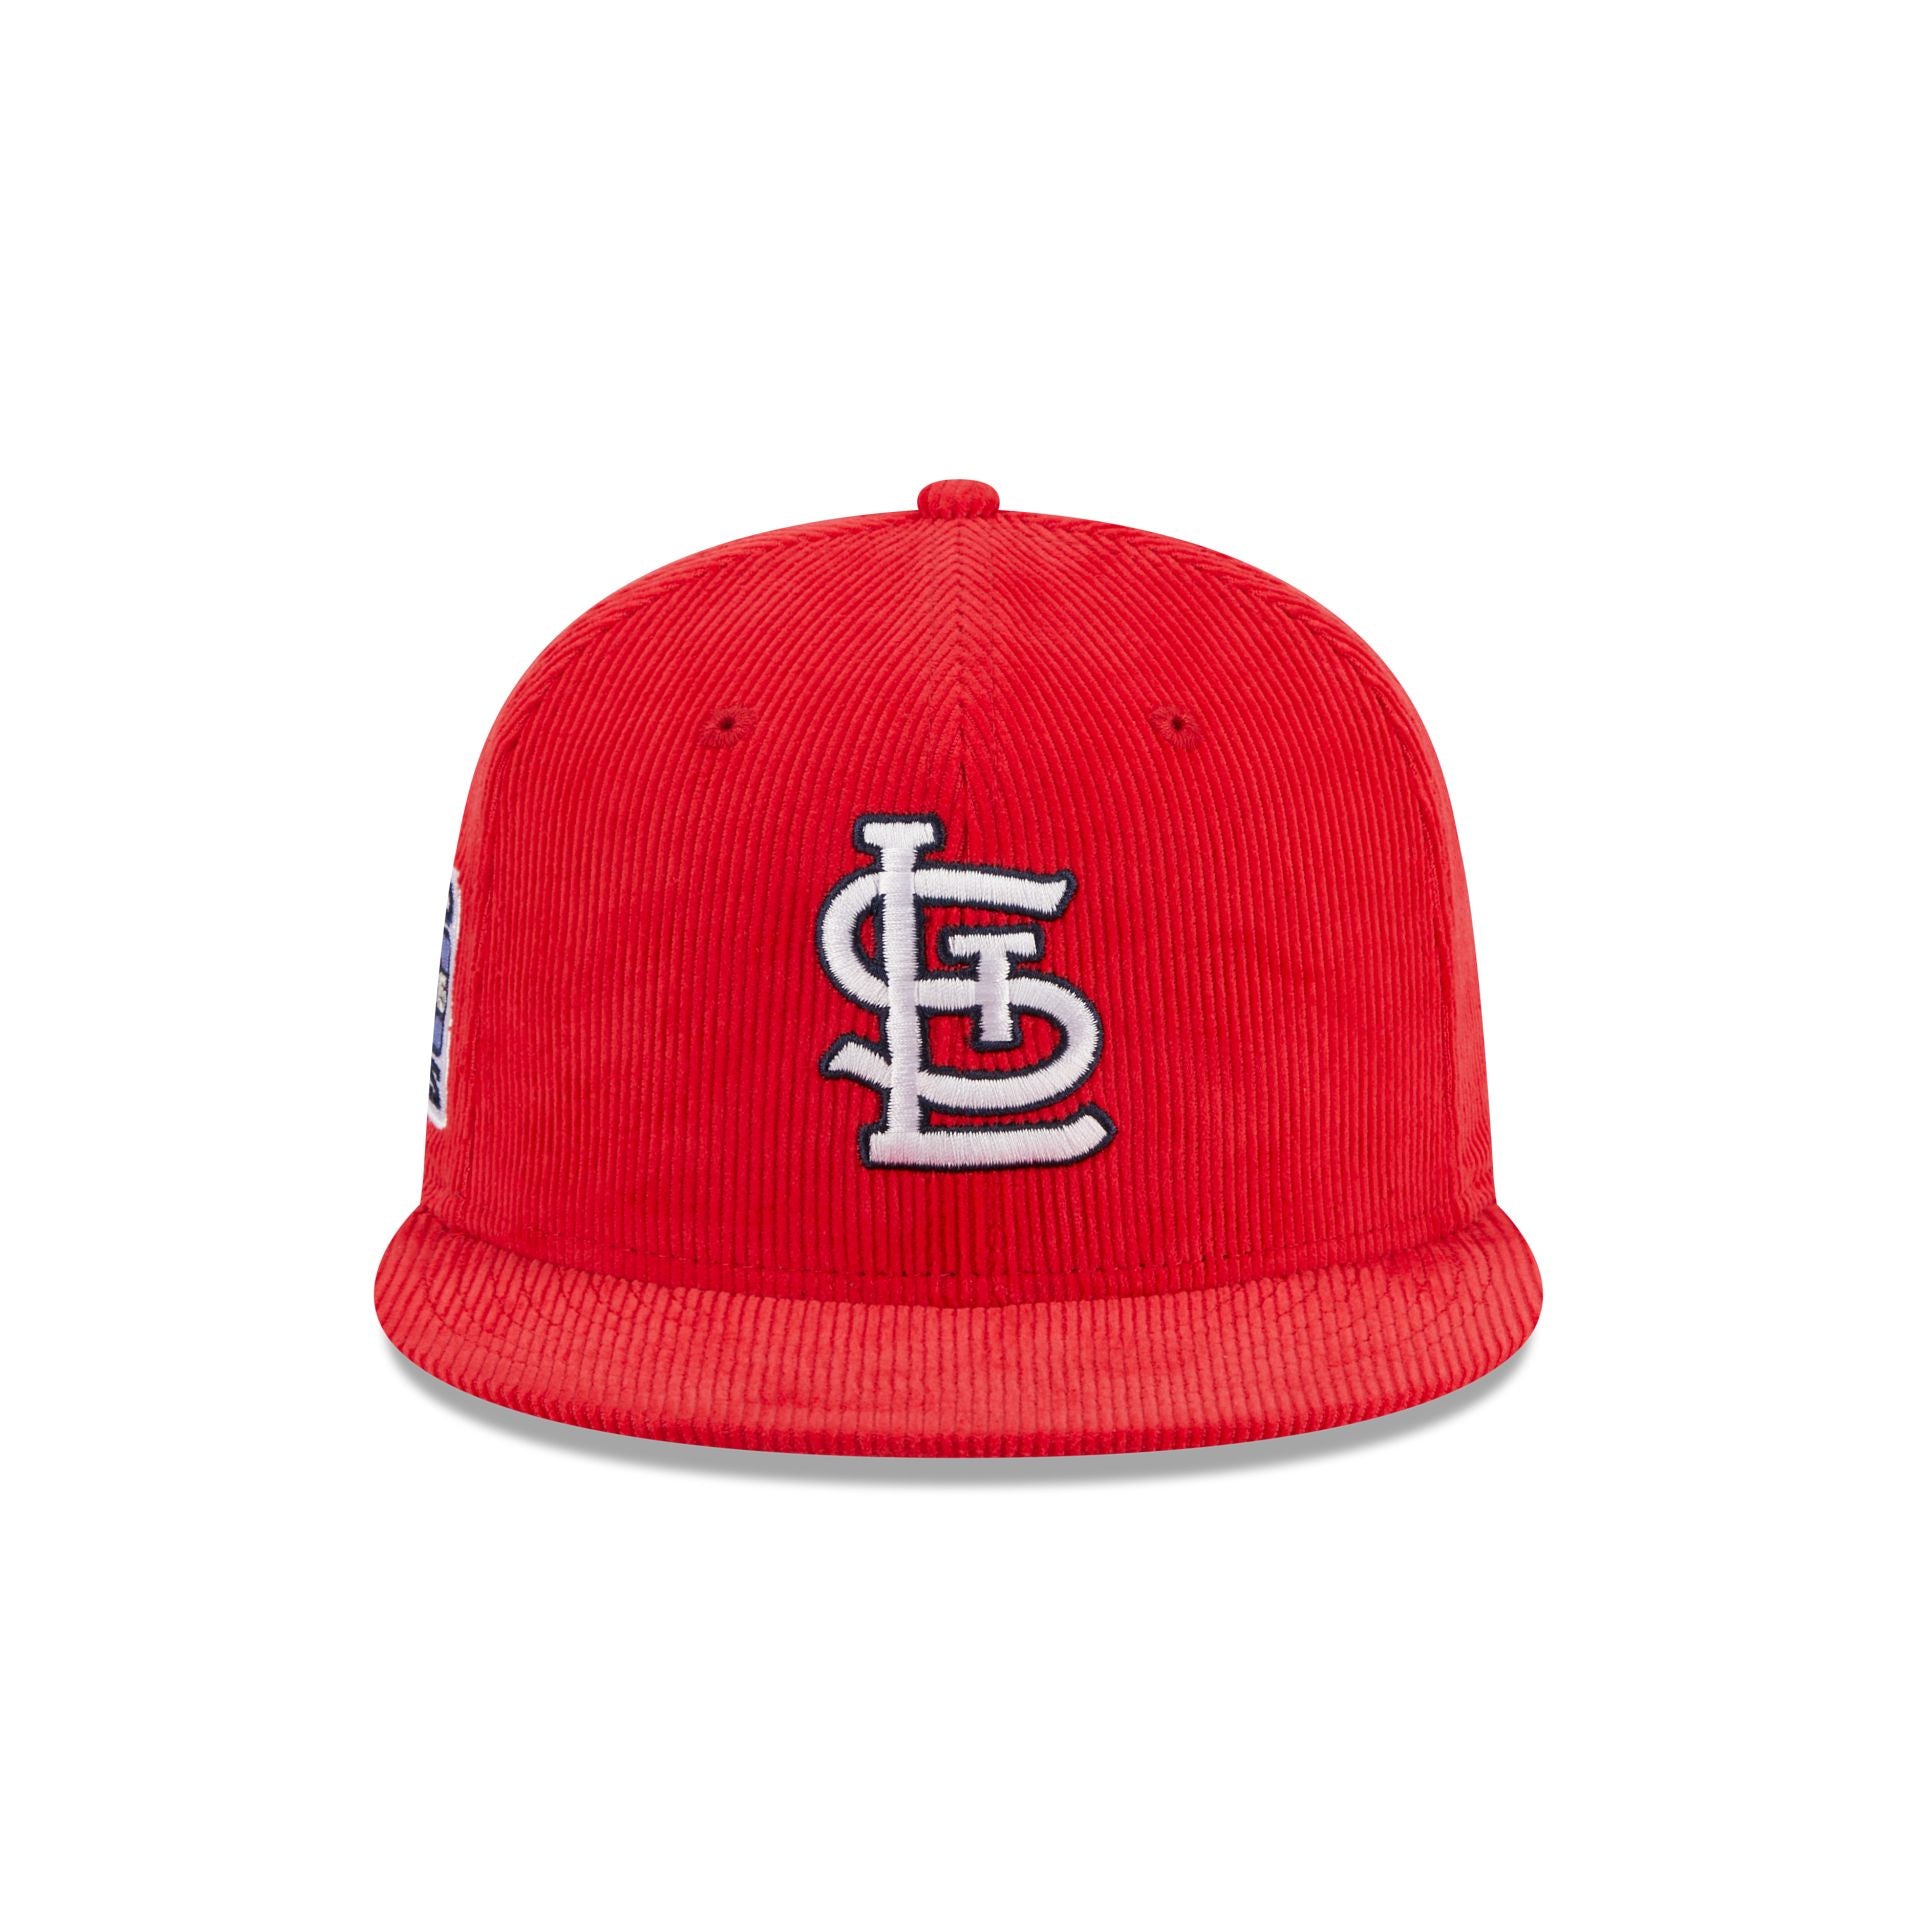 Letterman St. Louis Cardinals Two Tone Red and White Jacket